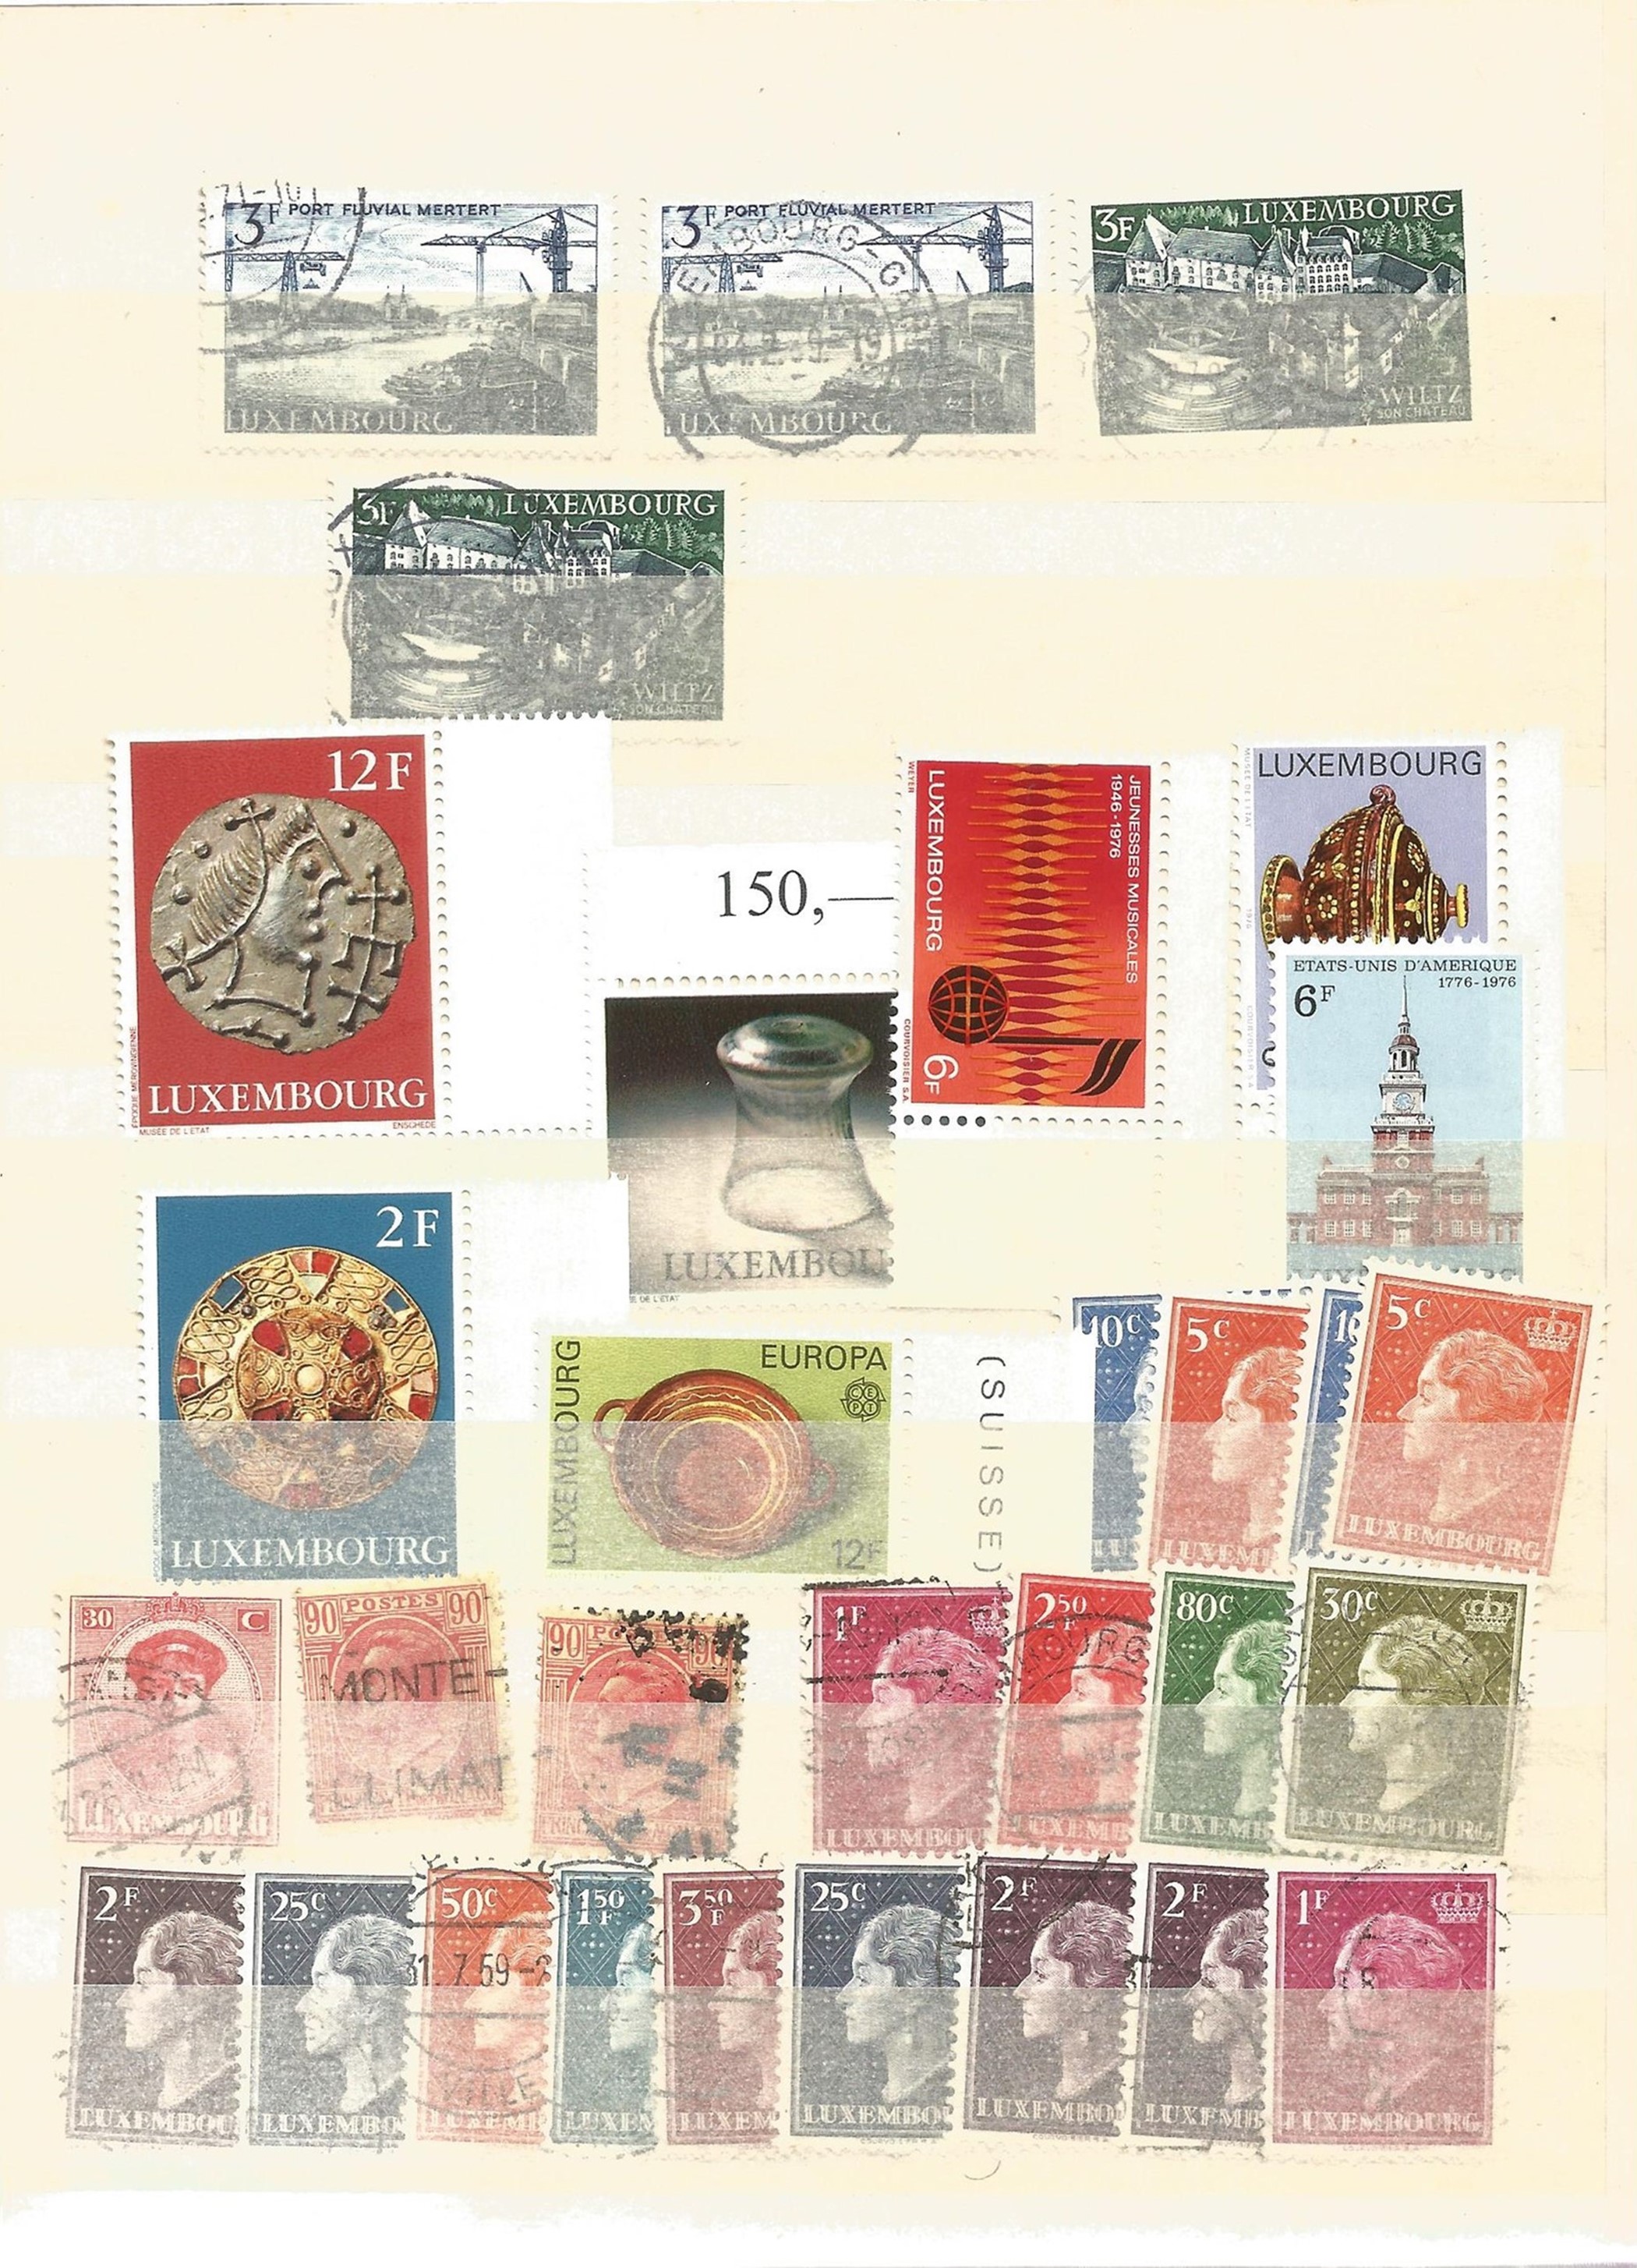 Luxembourg Stamps Mint & Used in Small Album containing approx 180 Mint & Used Stamps, all Stamps - Image 4 of 7